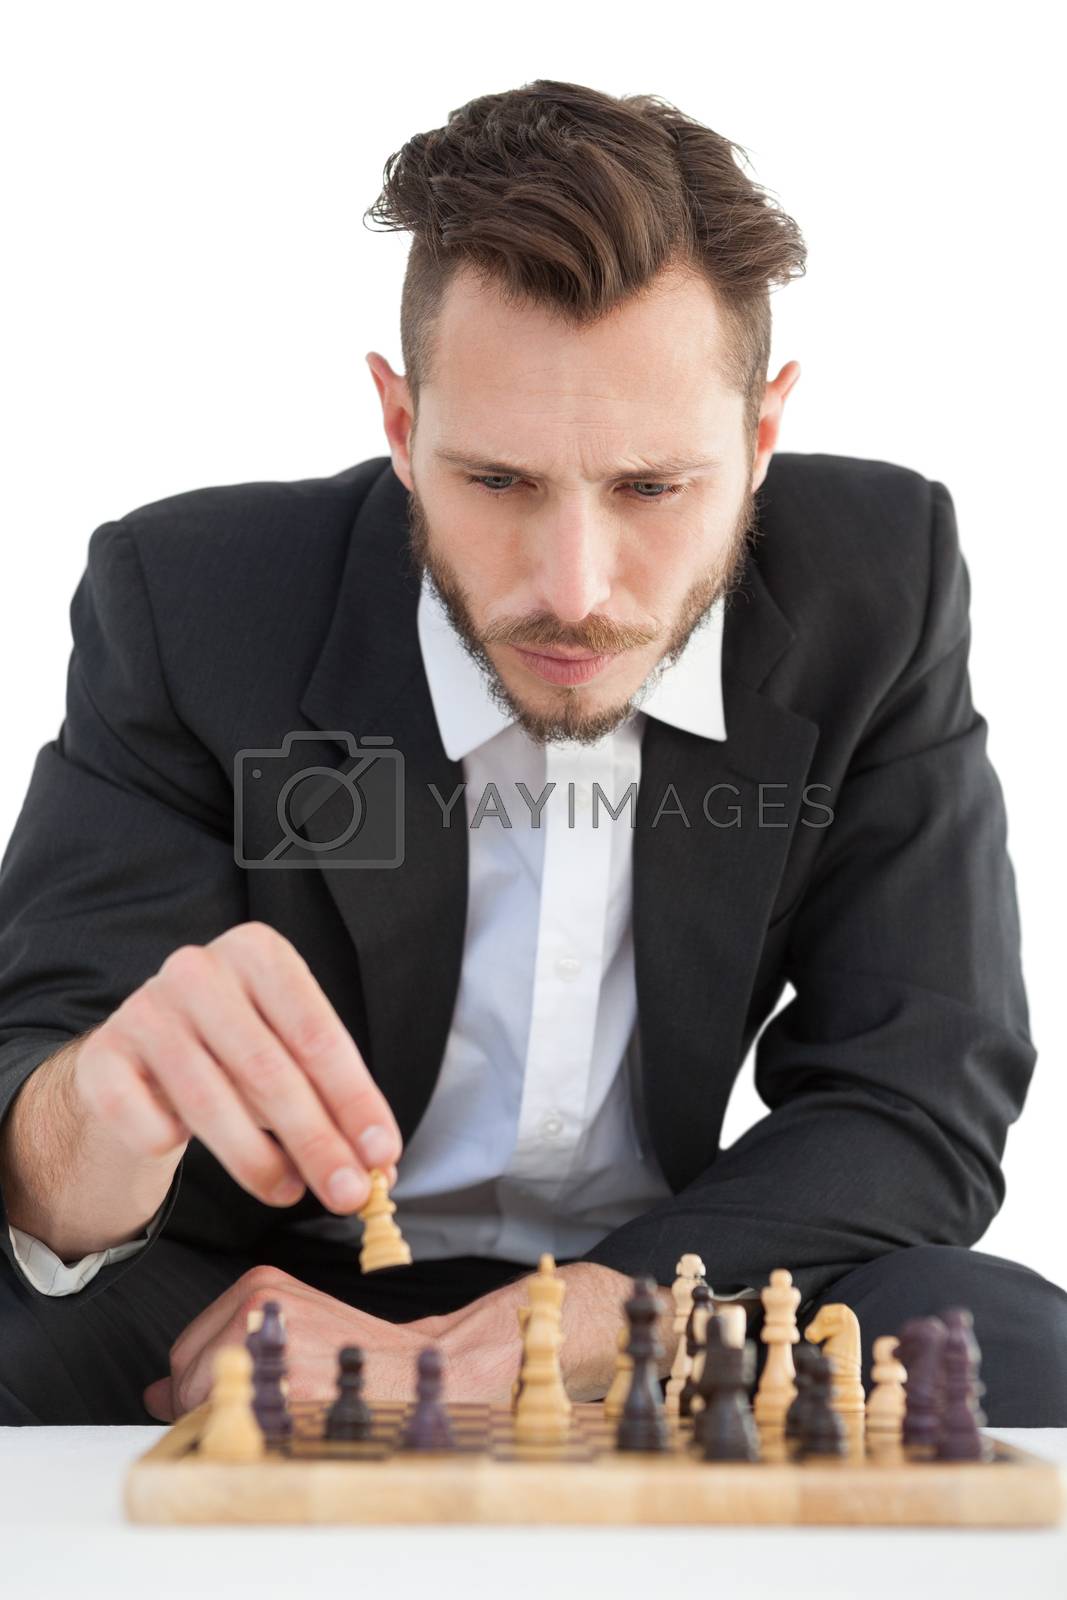 Royalty free image of Focused businessman playing chess solo by Wavebreakmedia